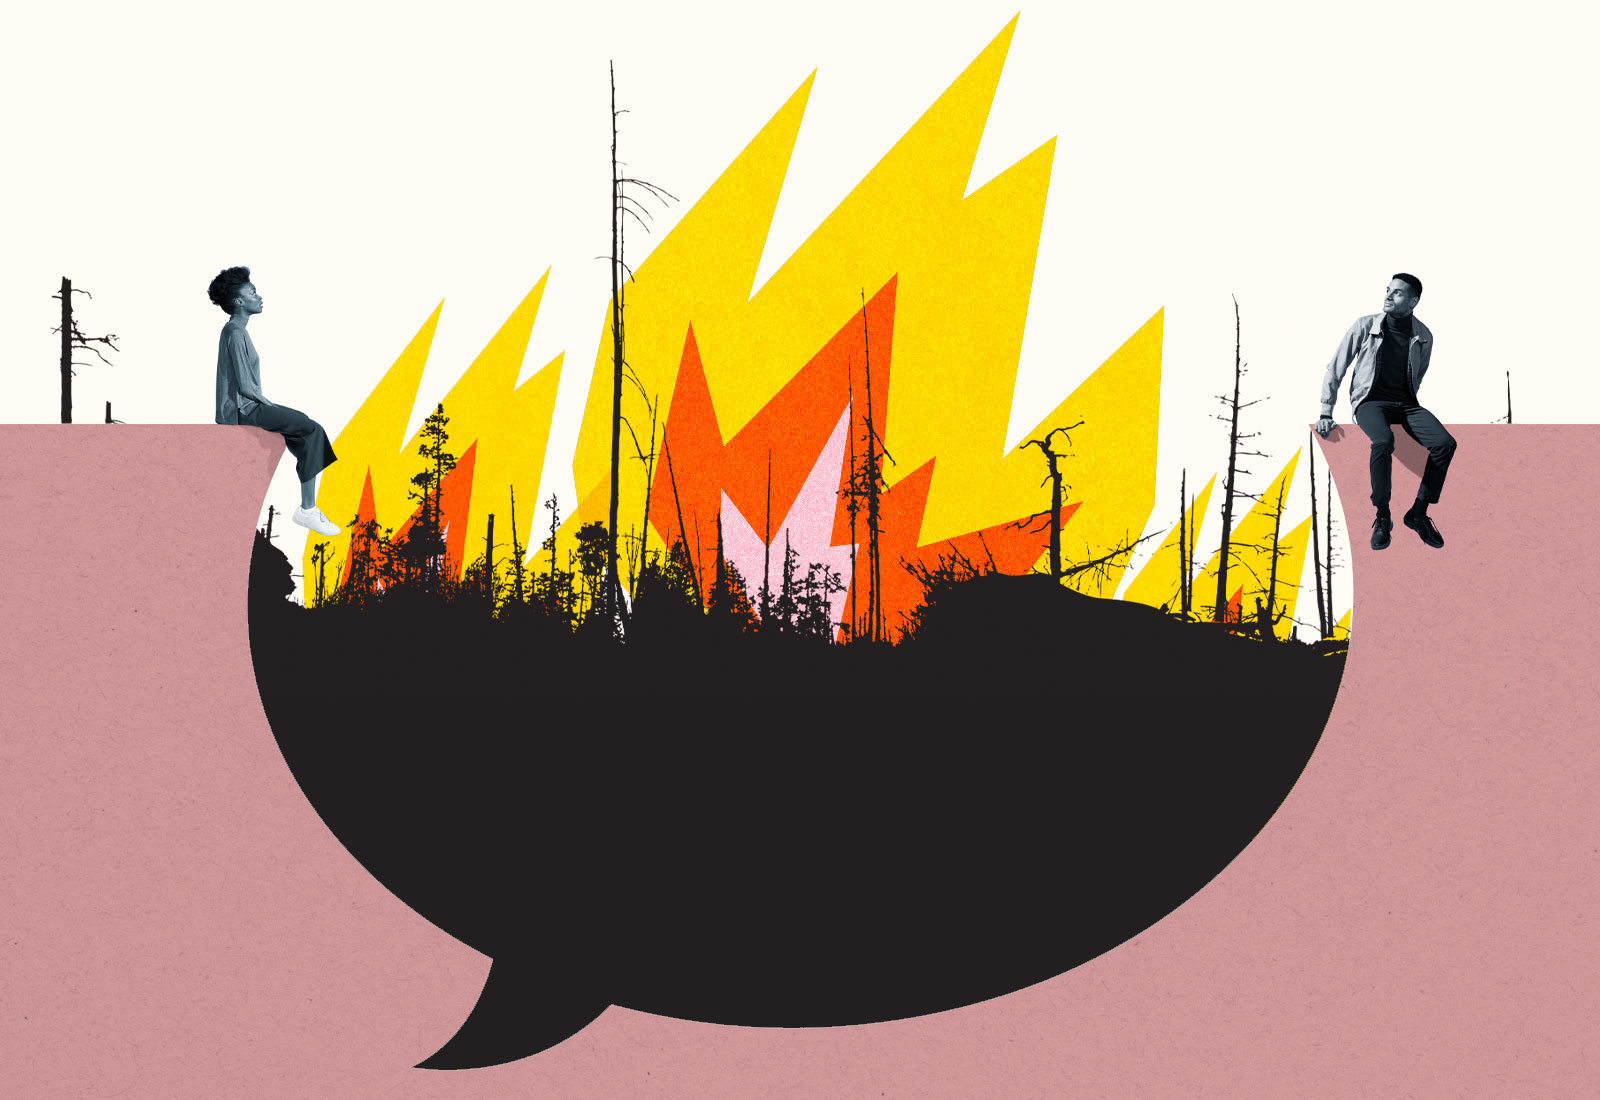 Collage: A woman and man sitting on top of a speech bubble shape with a wildfire in the background